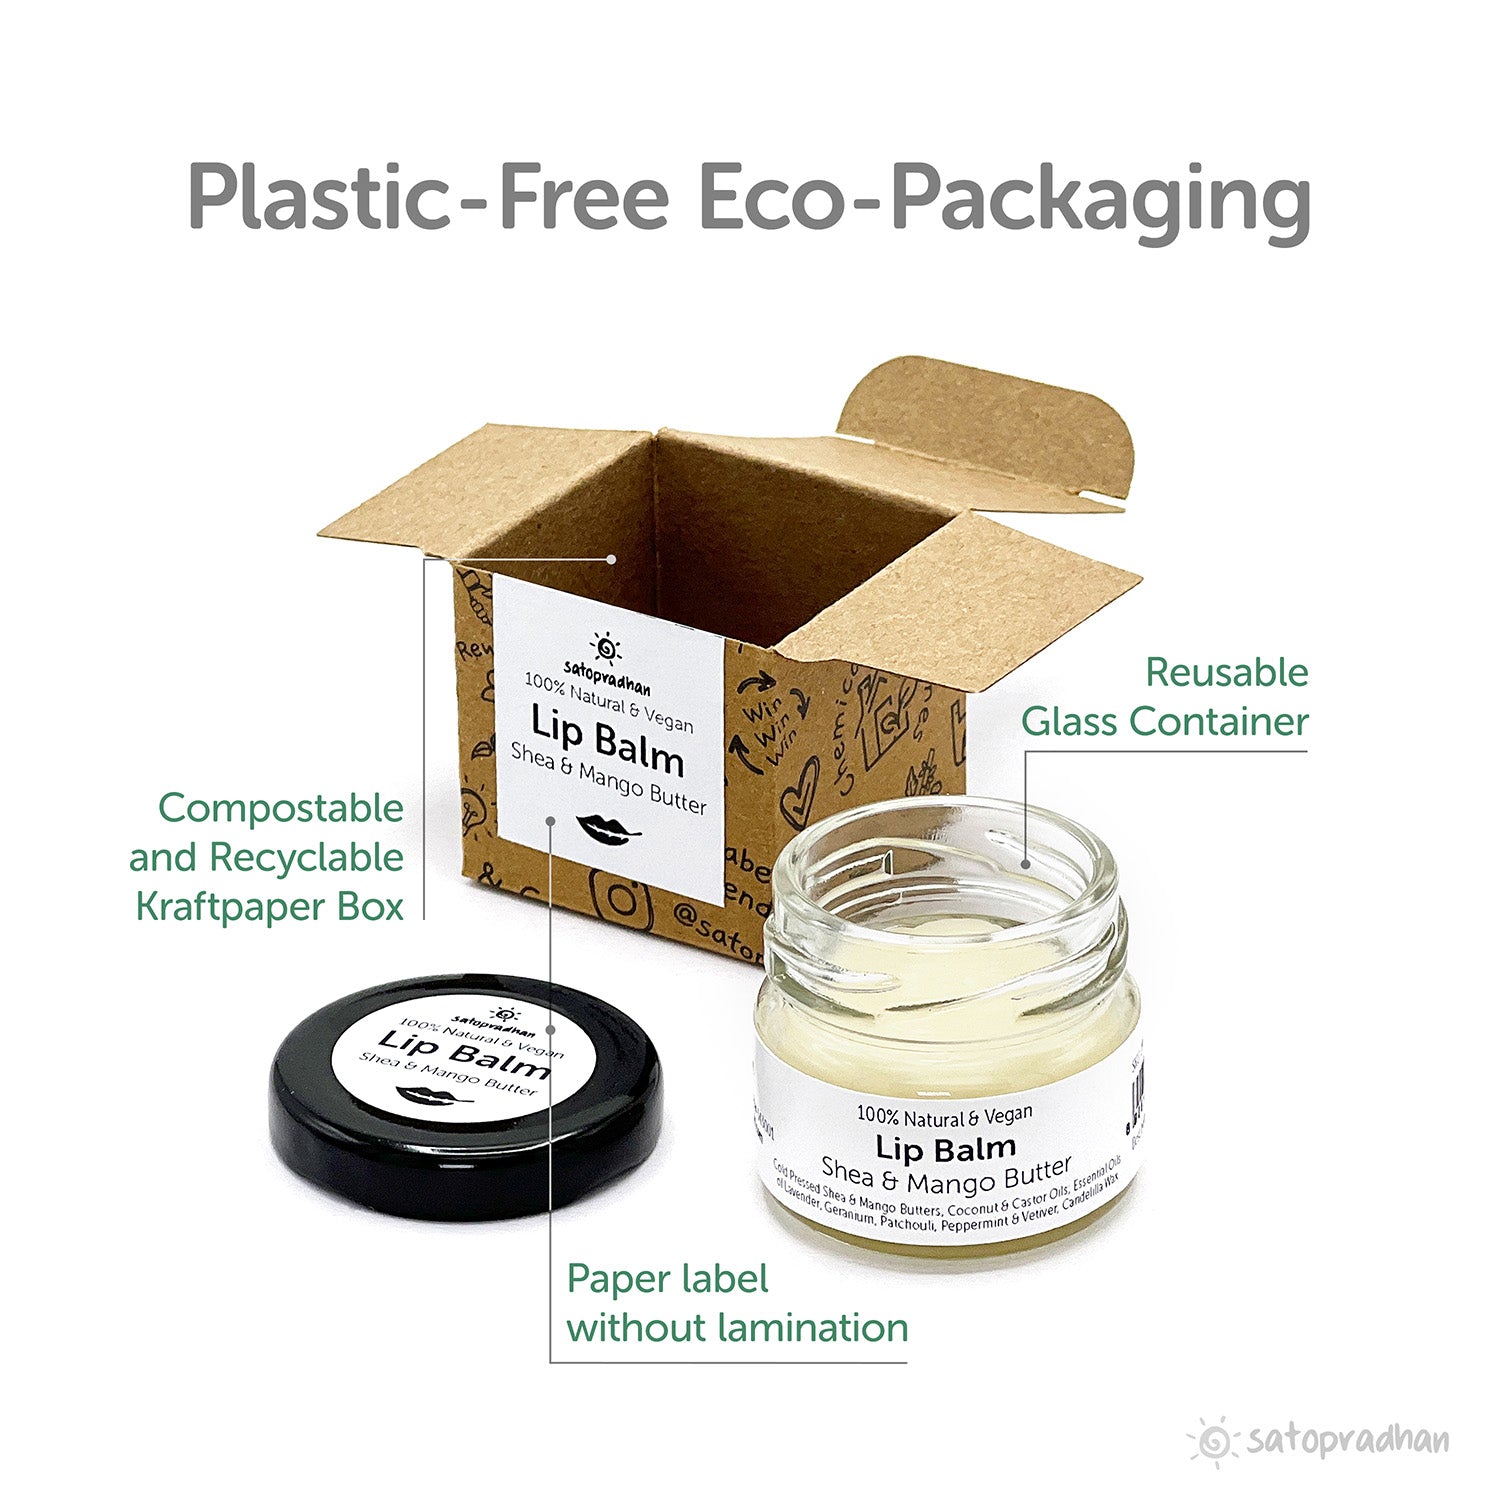 Lip balm added in a small reusable glass jar, packed in compostable eco-friendly outer box